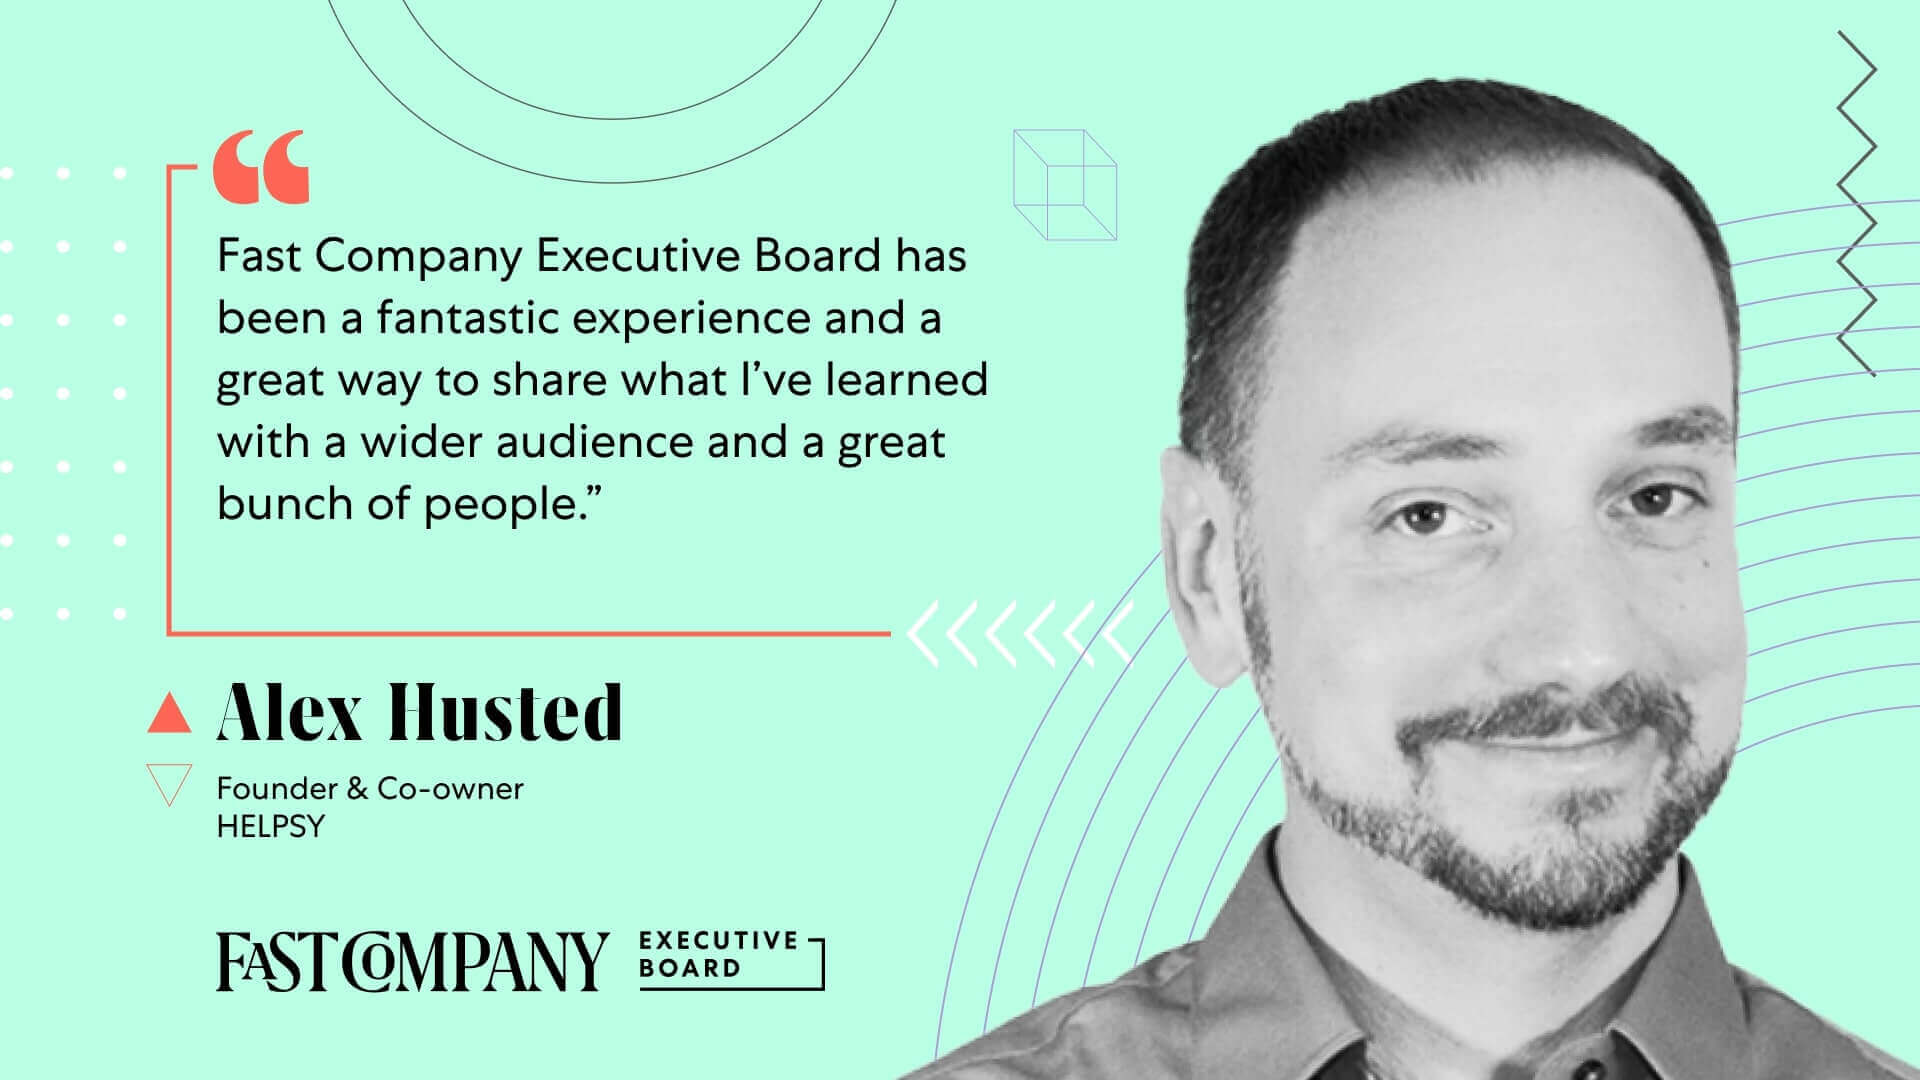 Fast Company Executive Board Gives Alex Husted Support for His Company’s Environmental Mission